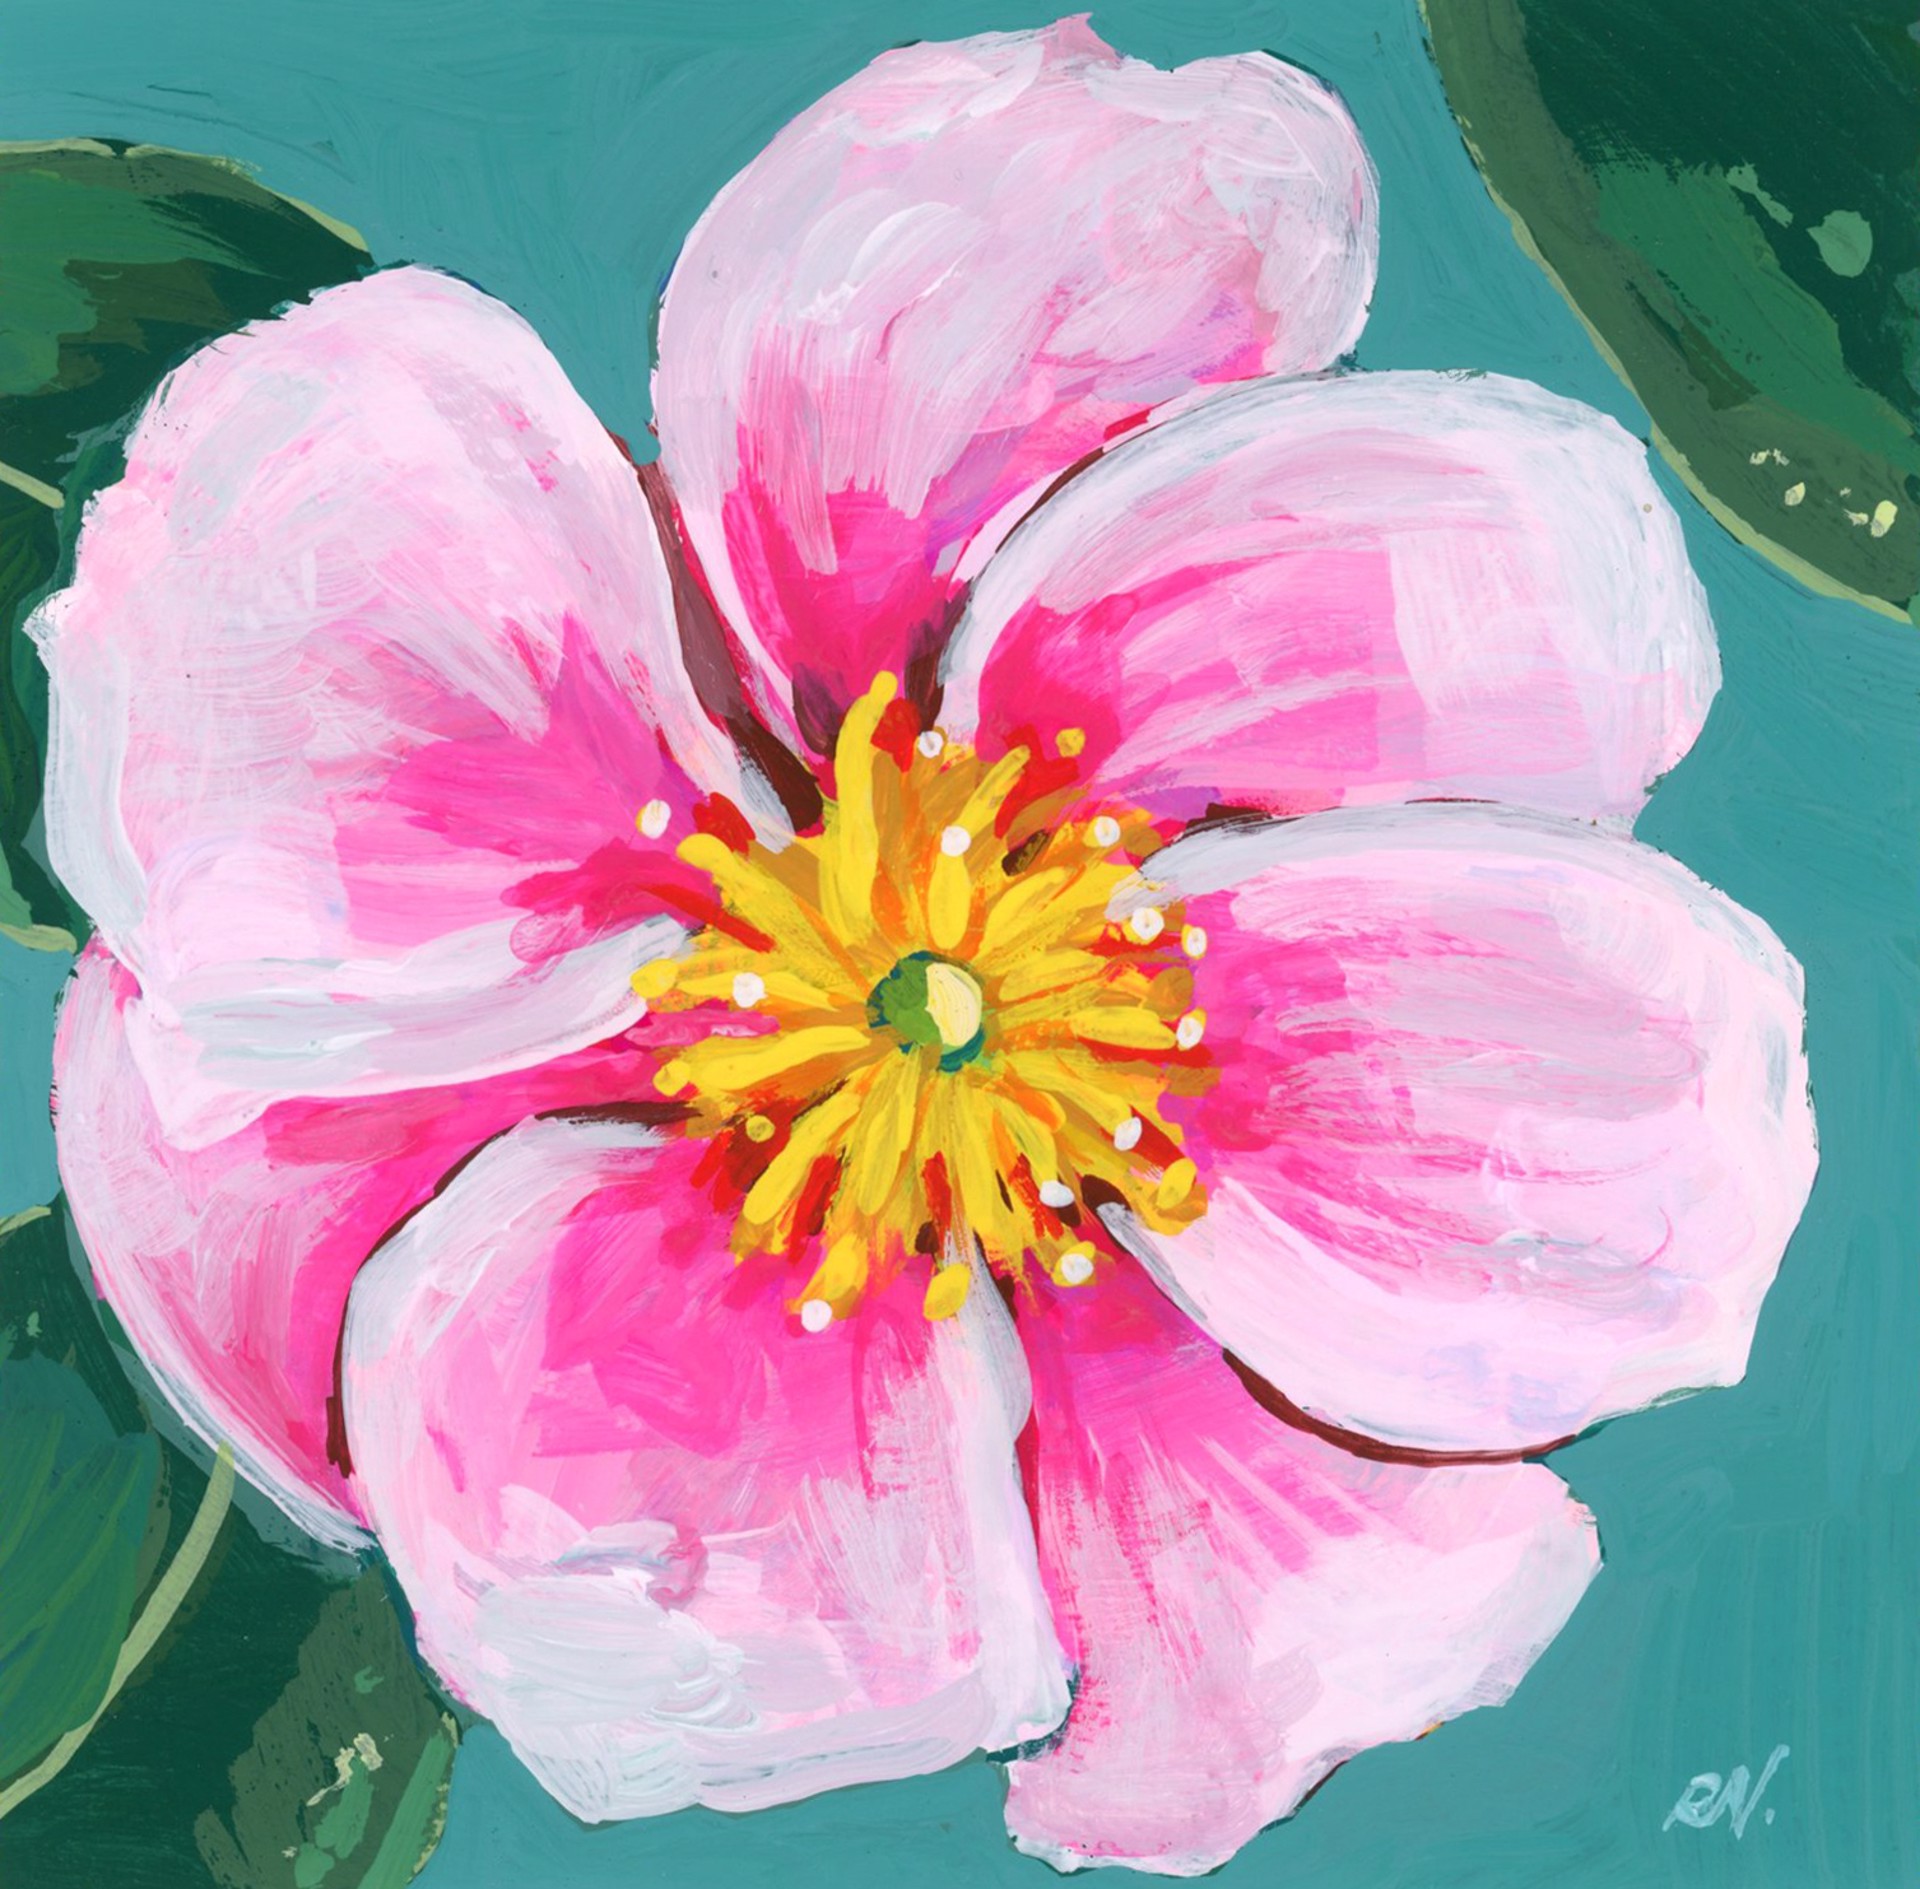 Camellia I by Rachael Nerney